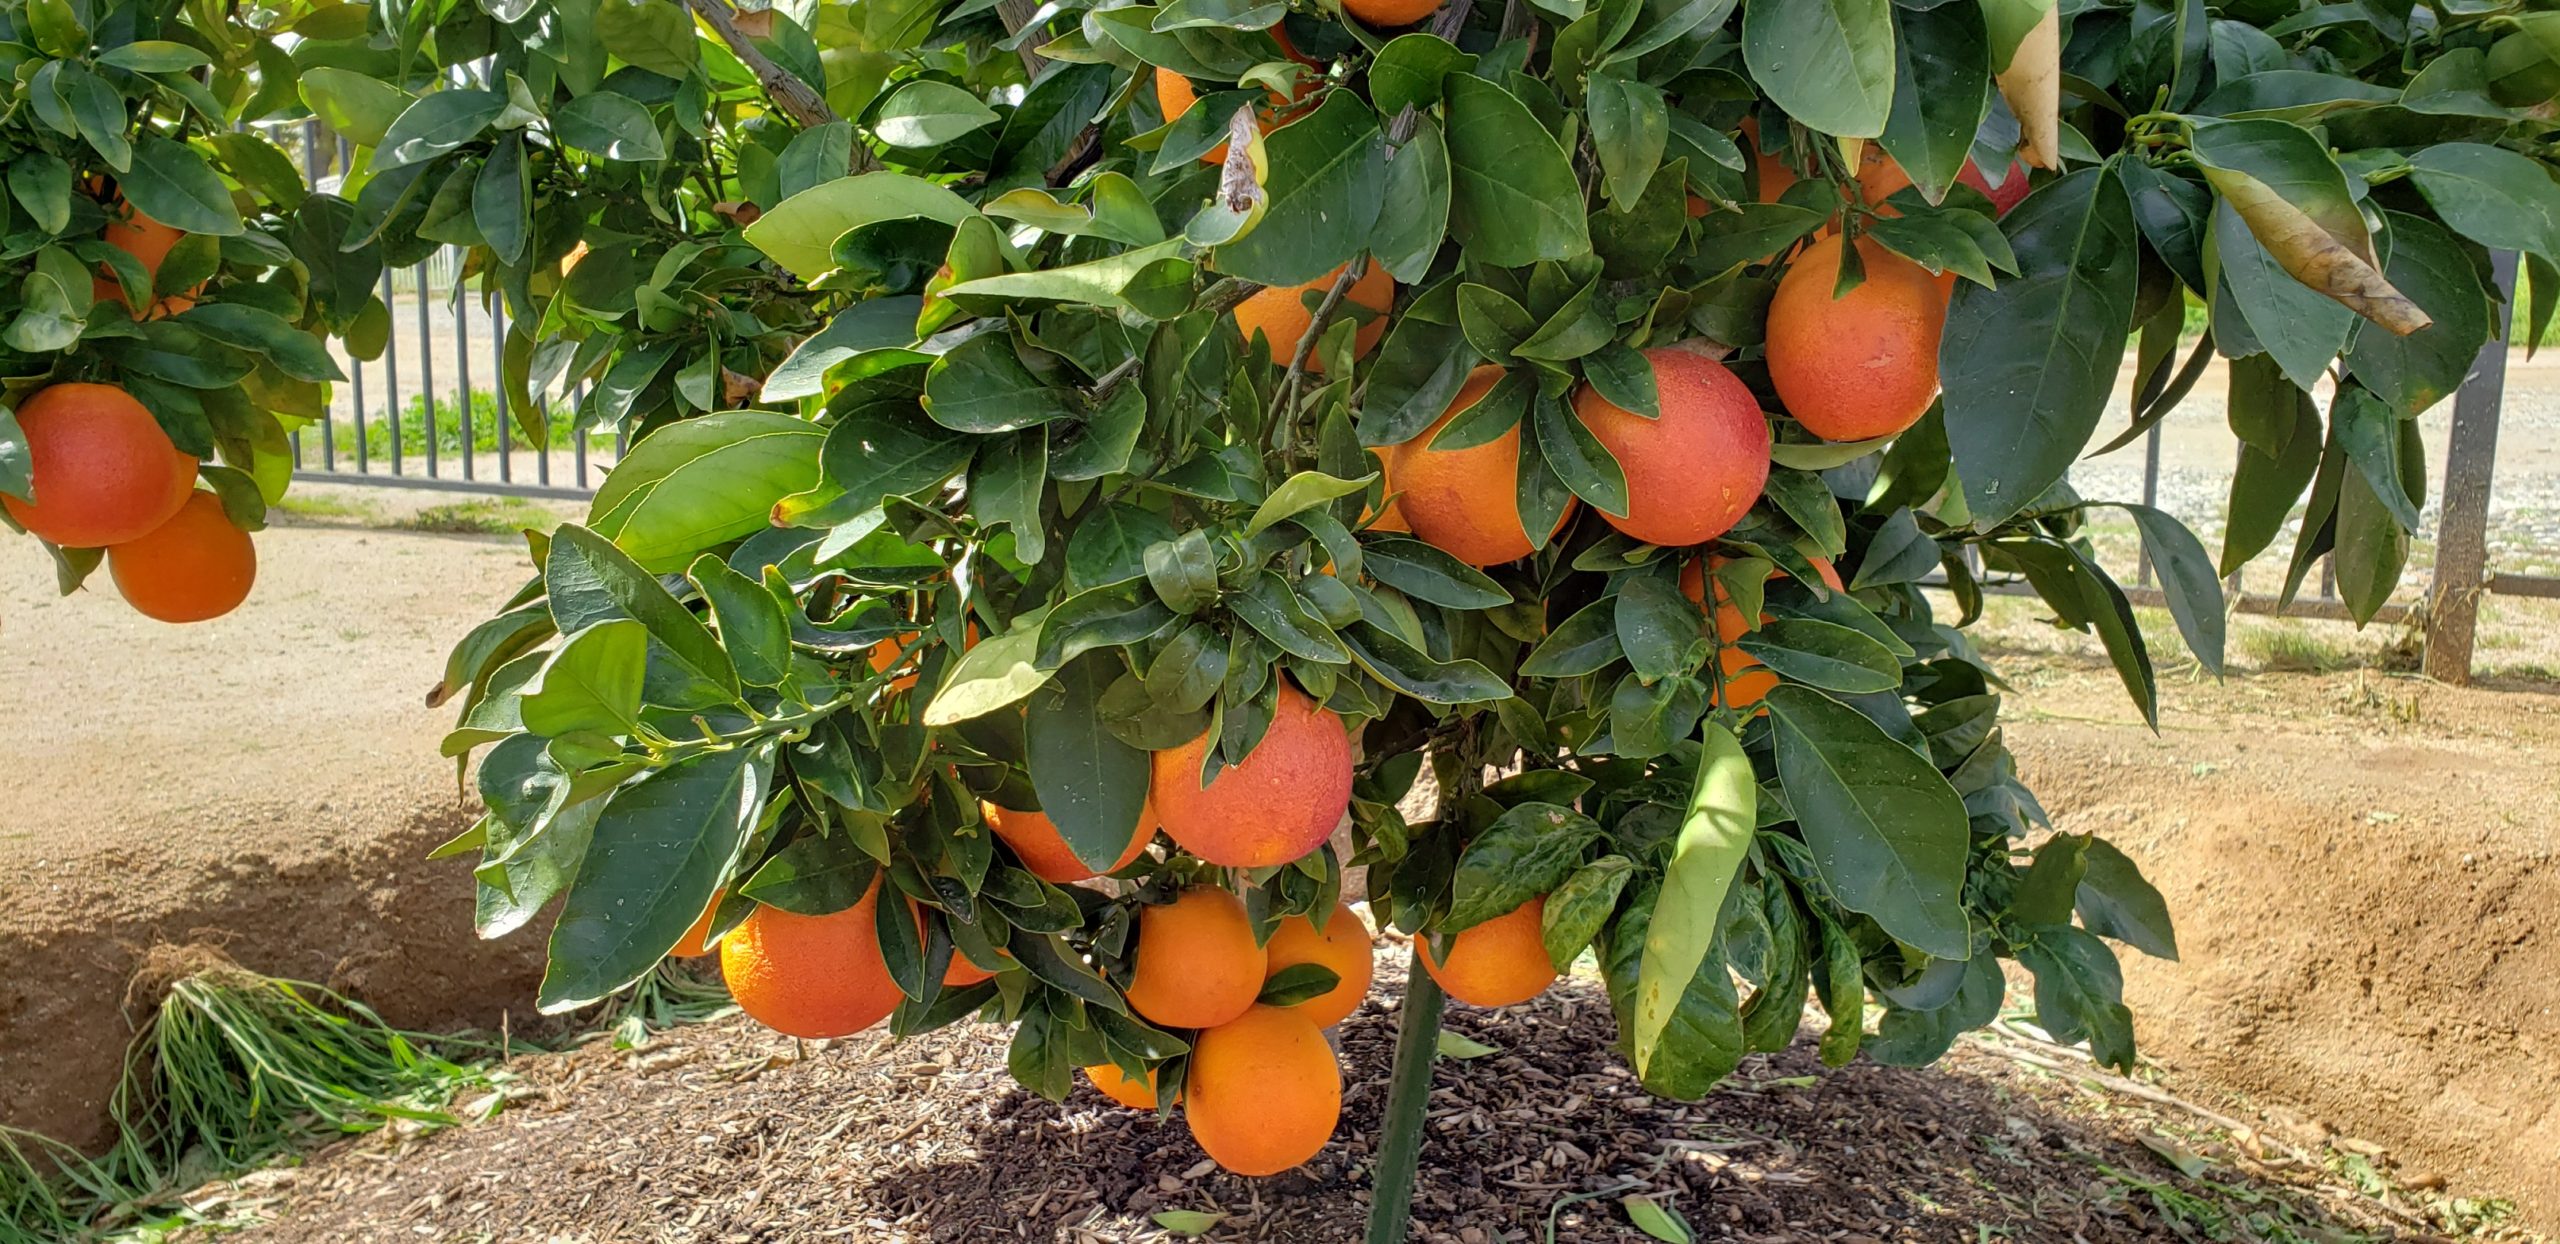 Great Garden Products - Morro Blood Oranges 20190212_114304